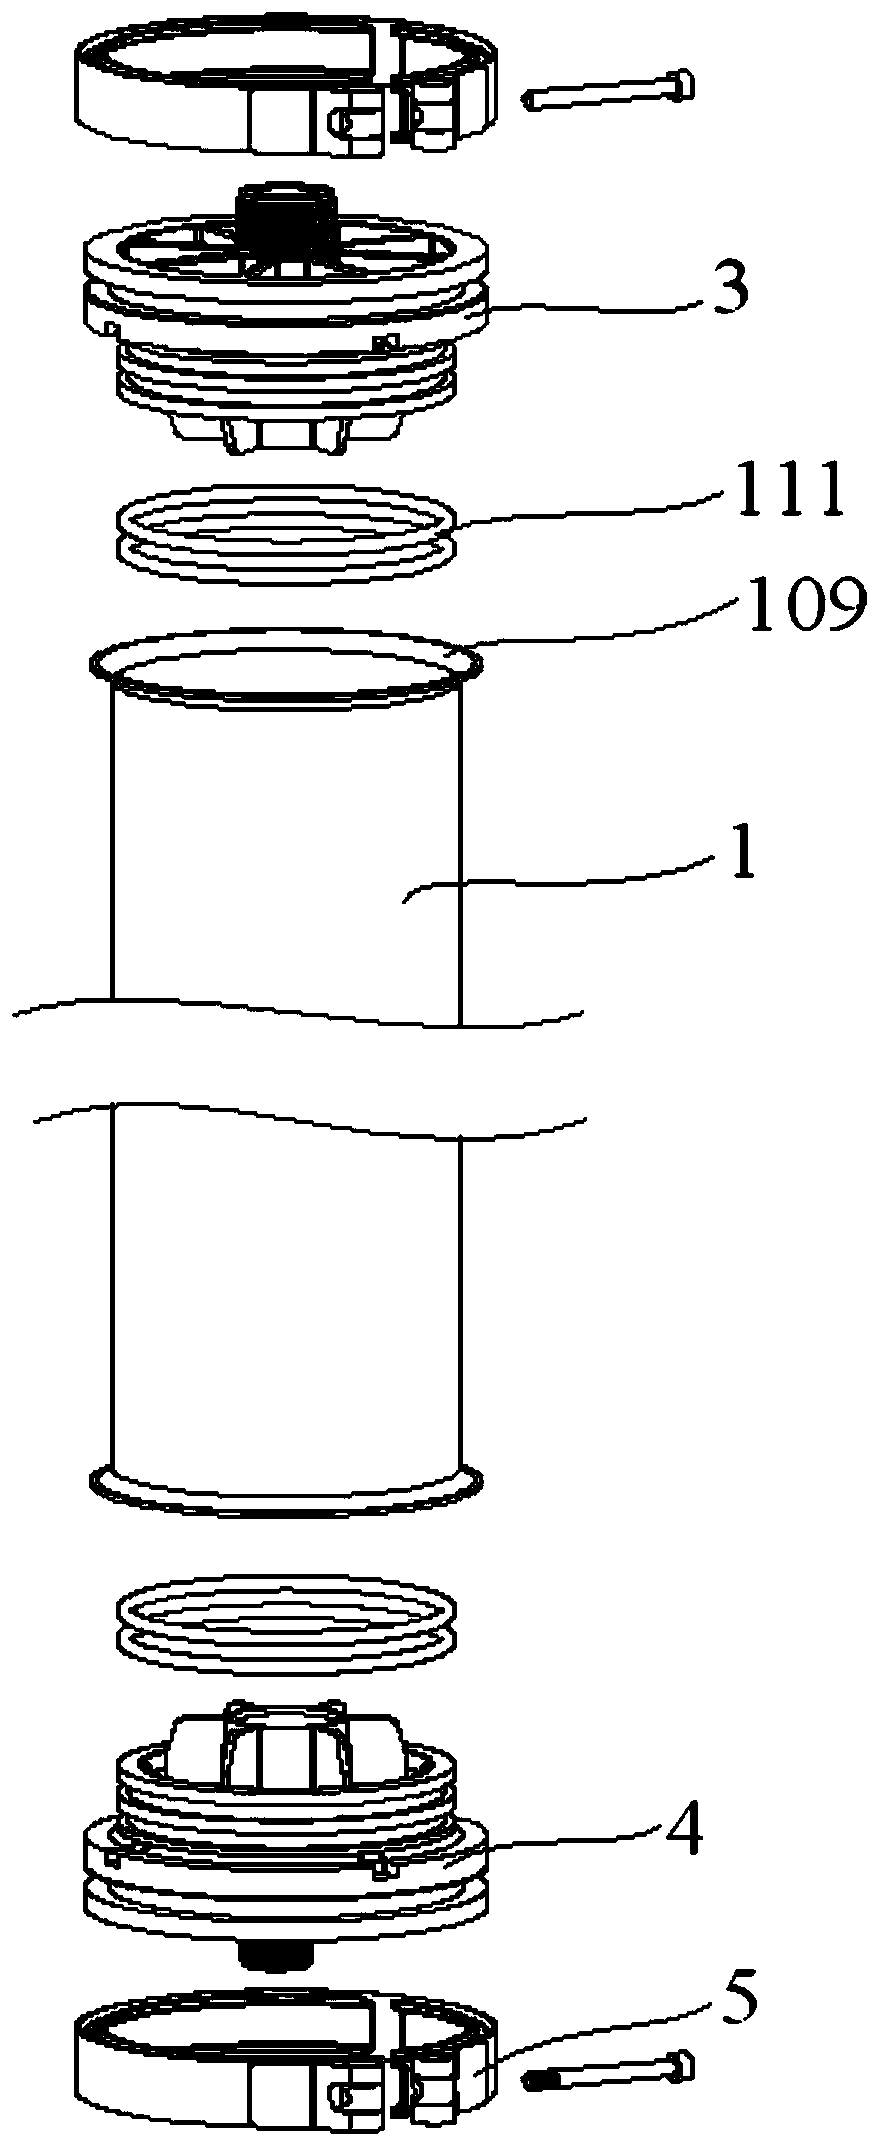 Carbon rod filter assembly